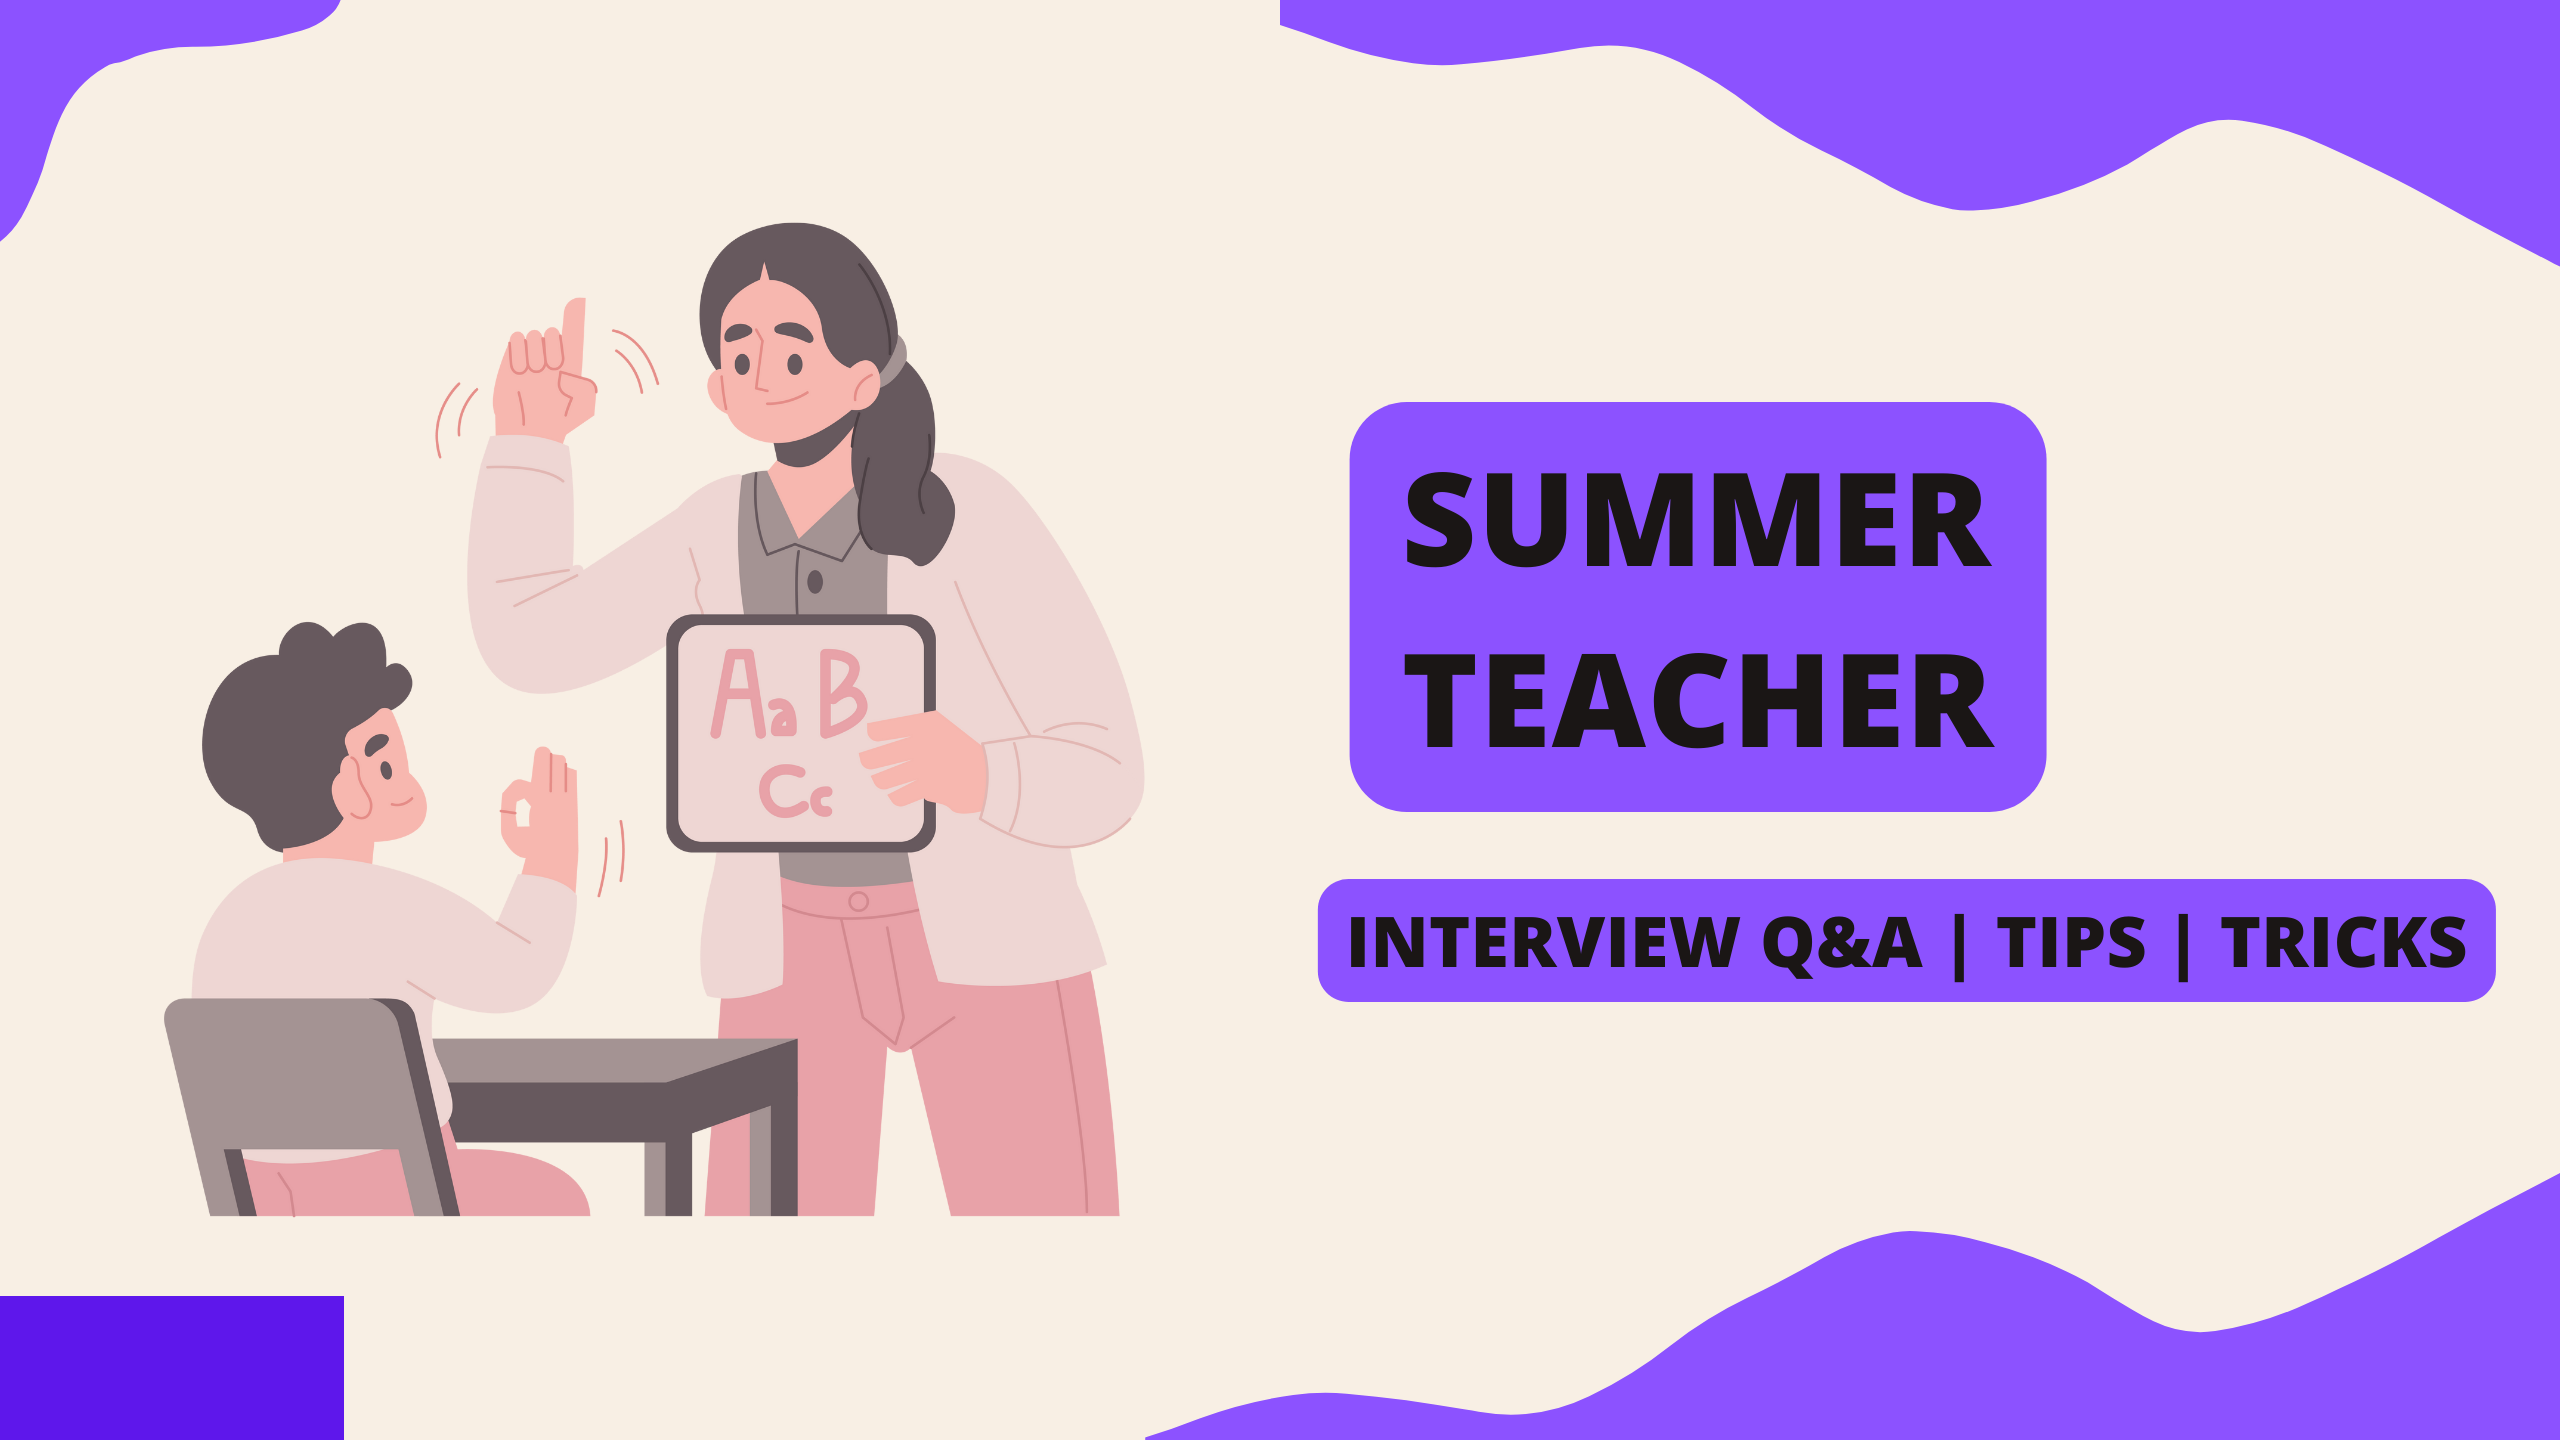 18 Common Interview Q&A for Summer Teacher in South Africa